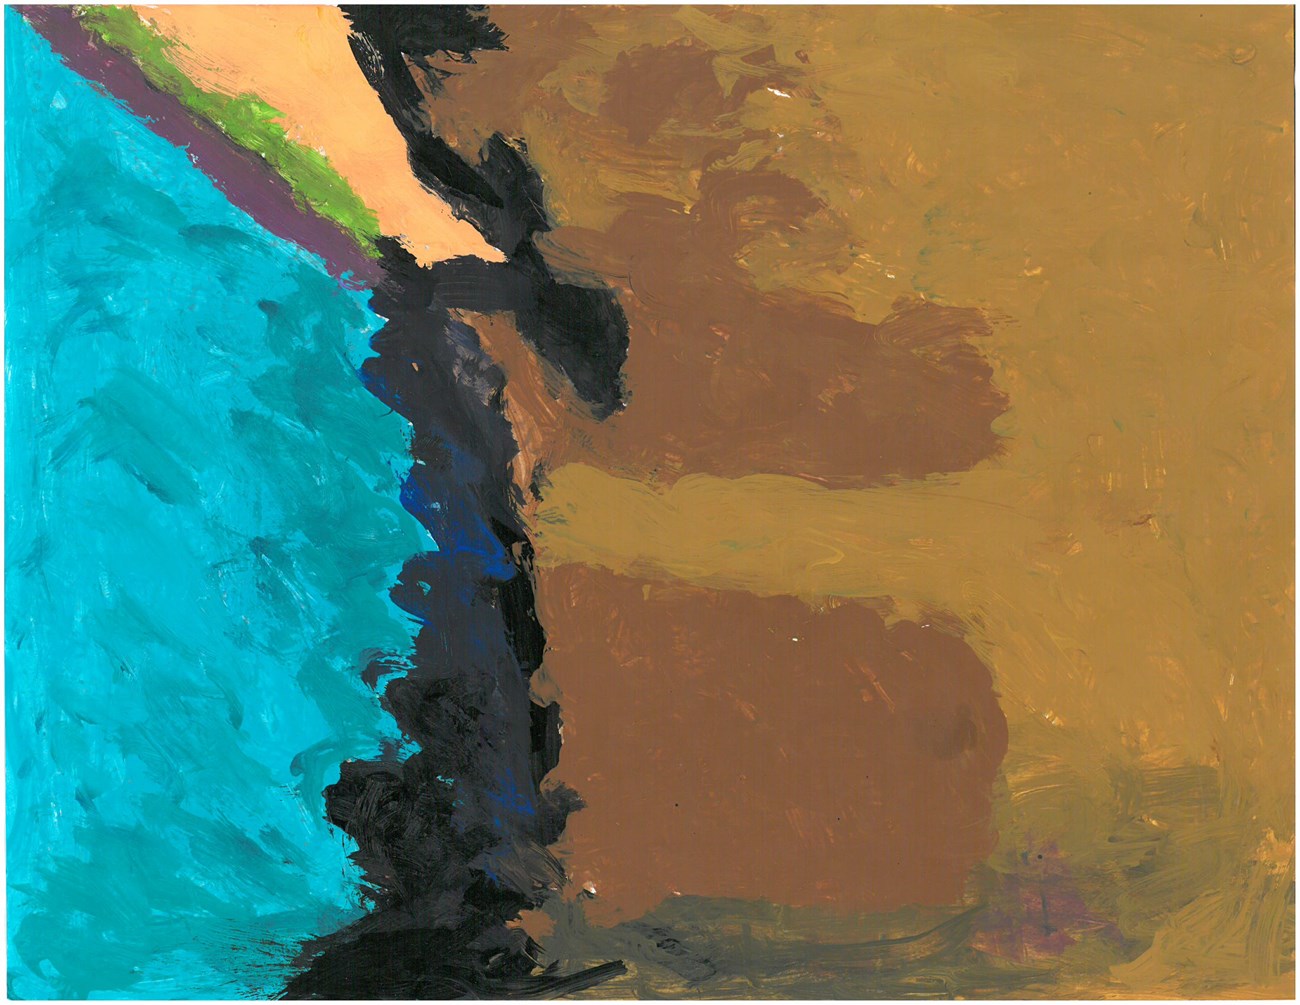 Abstract painting - bright blue meets the left edge, leading to a black jagged line, most of the image is dark and light brown shades on the right side.